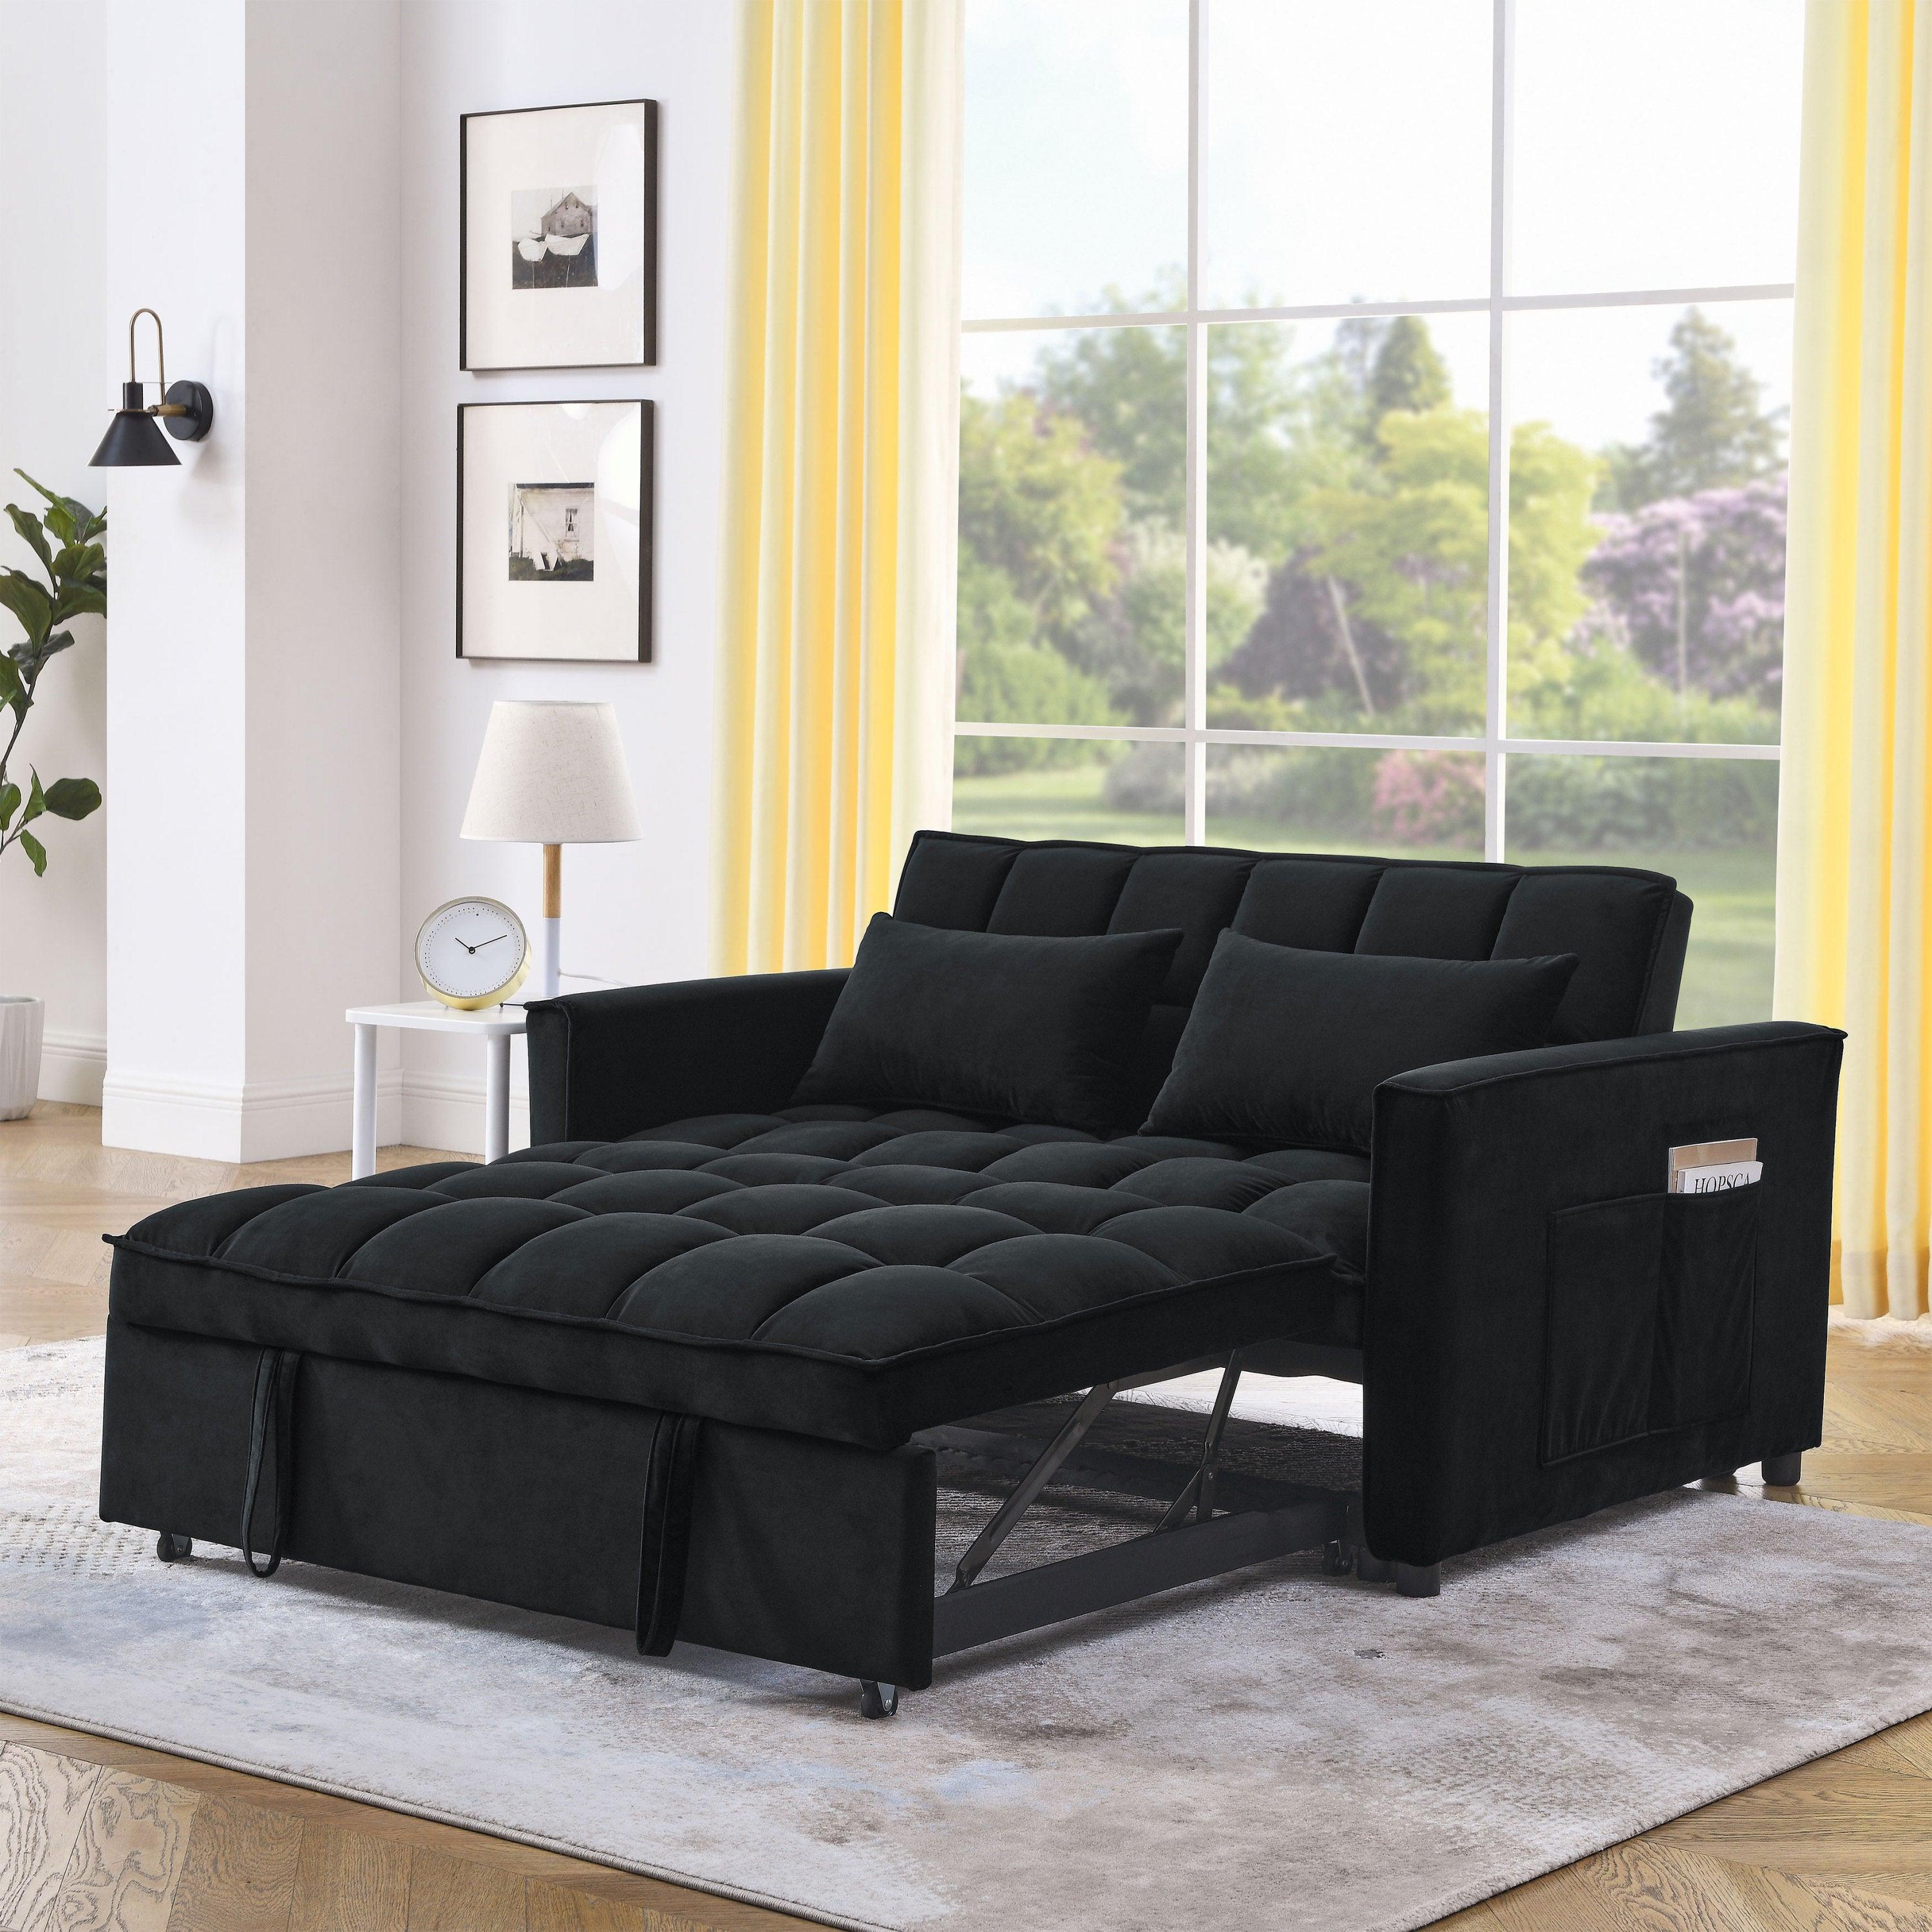 🆓🚛 Sleeper Sofa, Convertible Sofa, Recliner, Bed, 3-in-1, 3-Position Adjustable Backrest, 2-Seater Sectional, Two Side Pockets, 2 Pillows for Living Room, Apartment, Etc., Velvet Black 54" Wide.